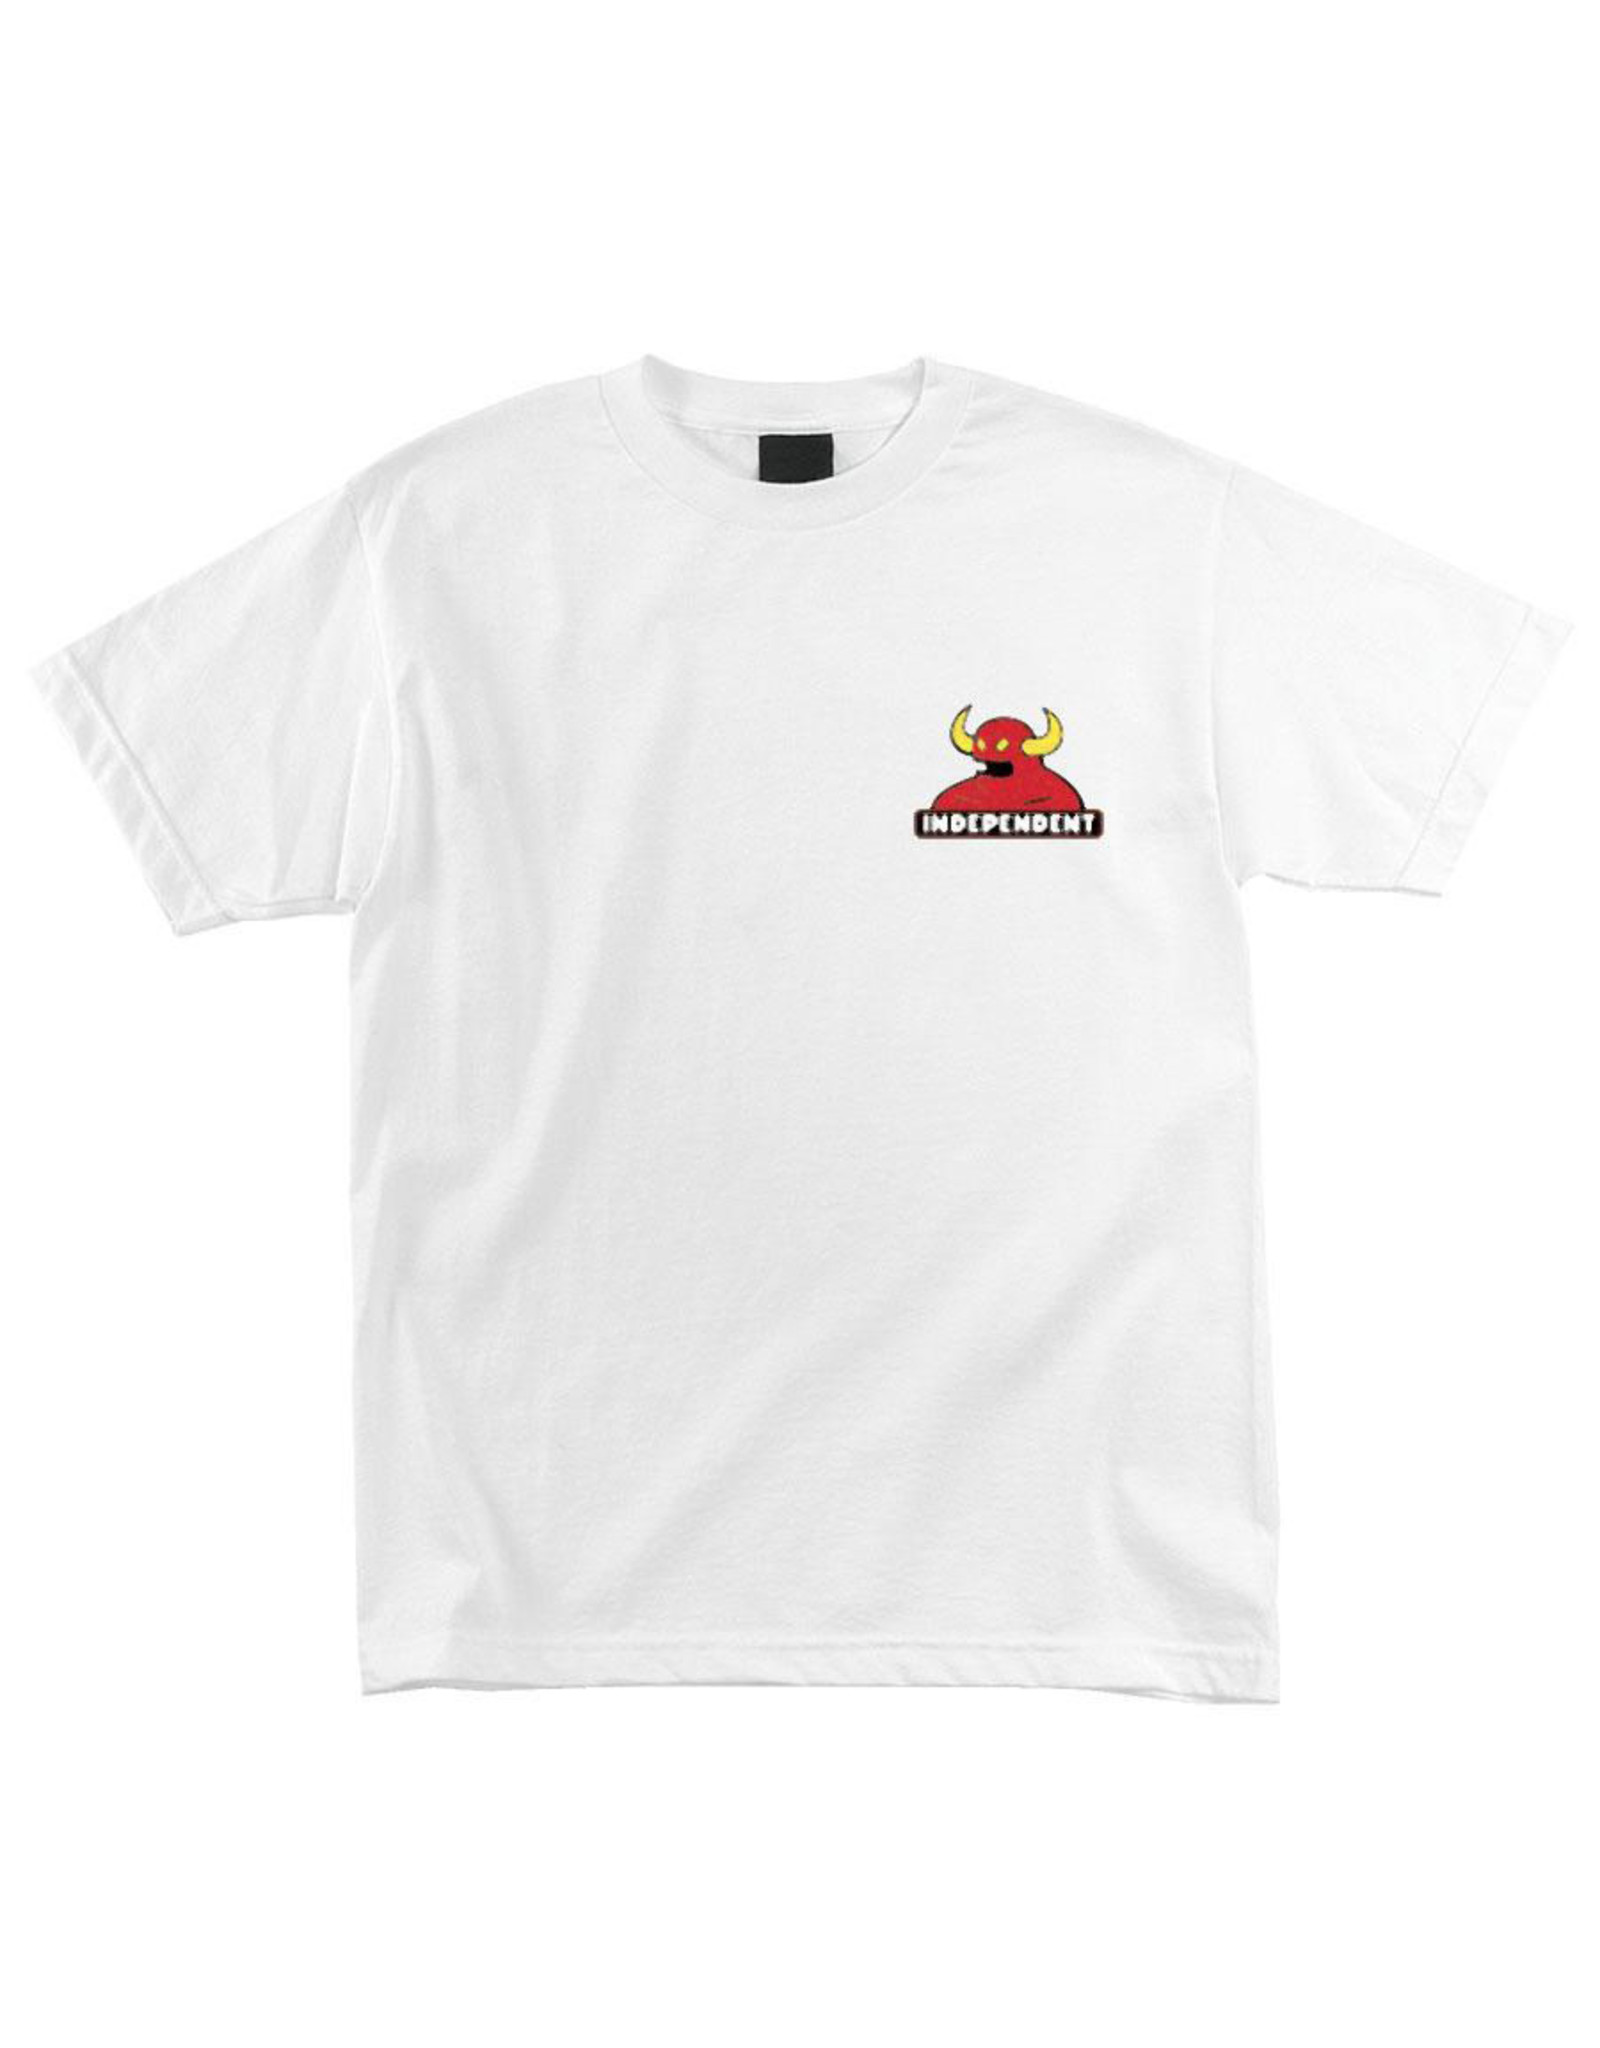 Independent Independent Tee X Toy Machine Mash Up S/S (White)